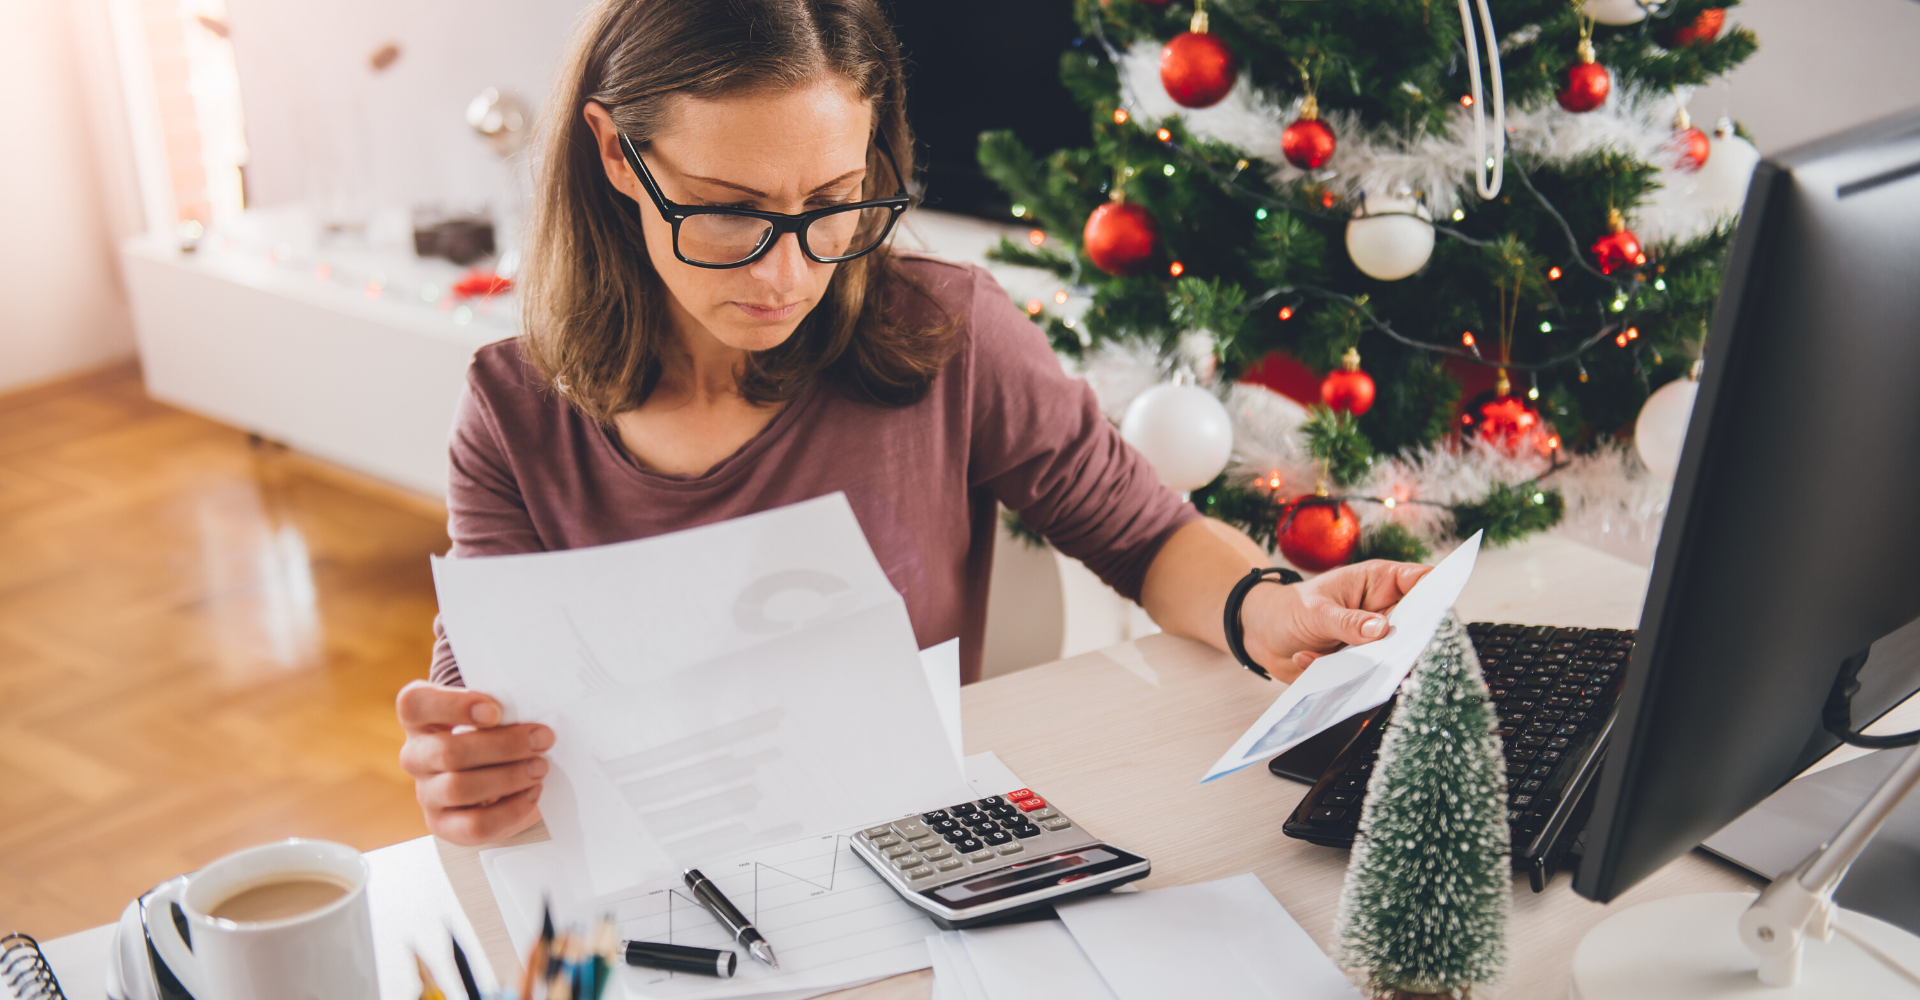 3 Ways to Prevent Post Holiday Shopping Debt